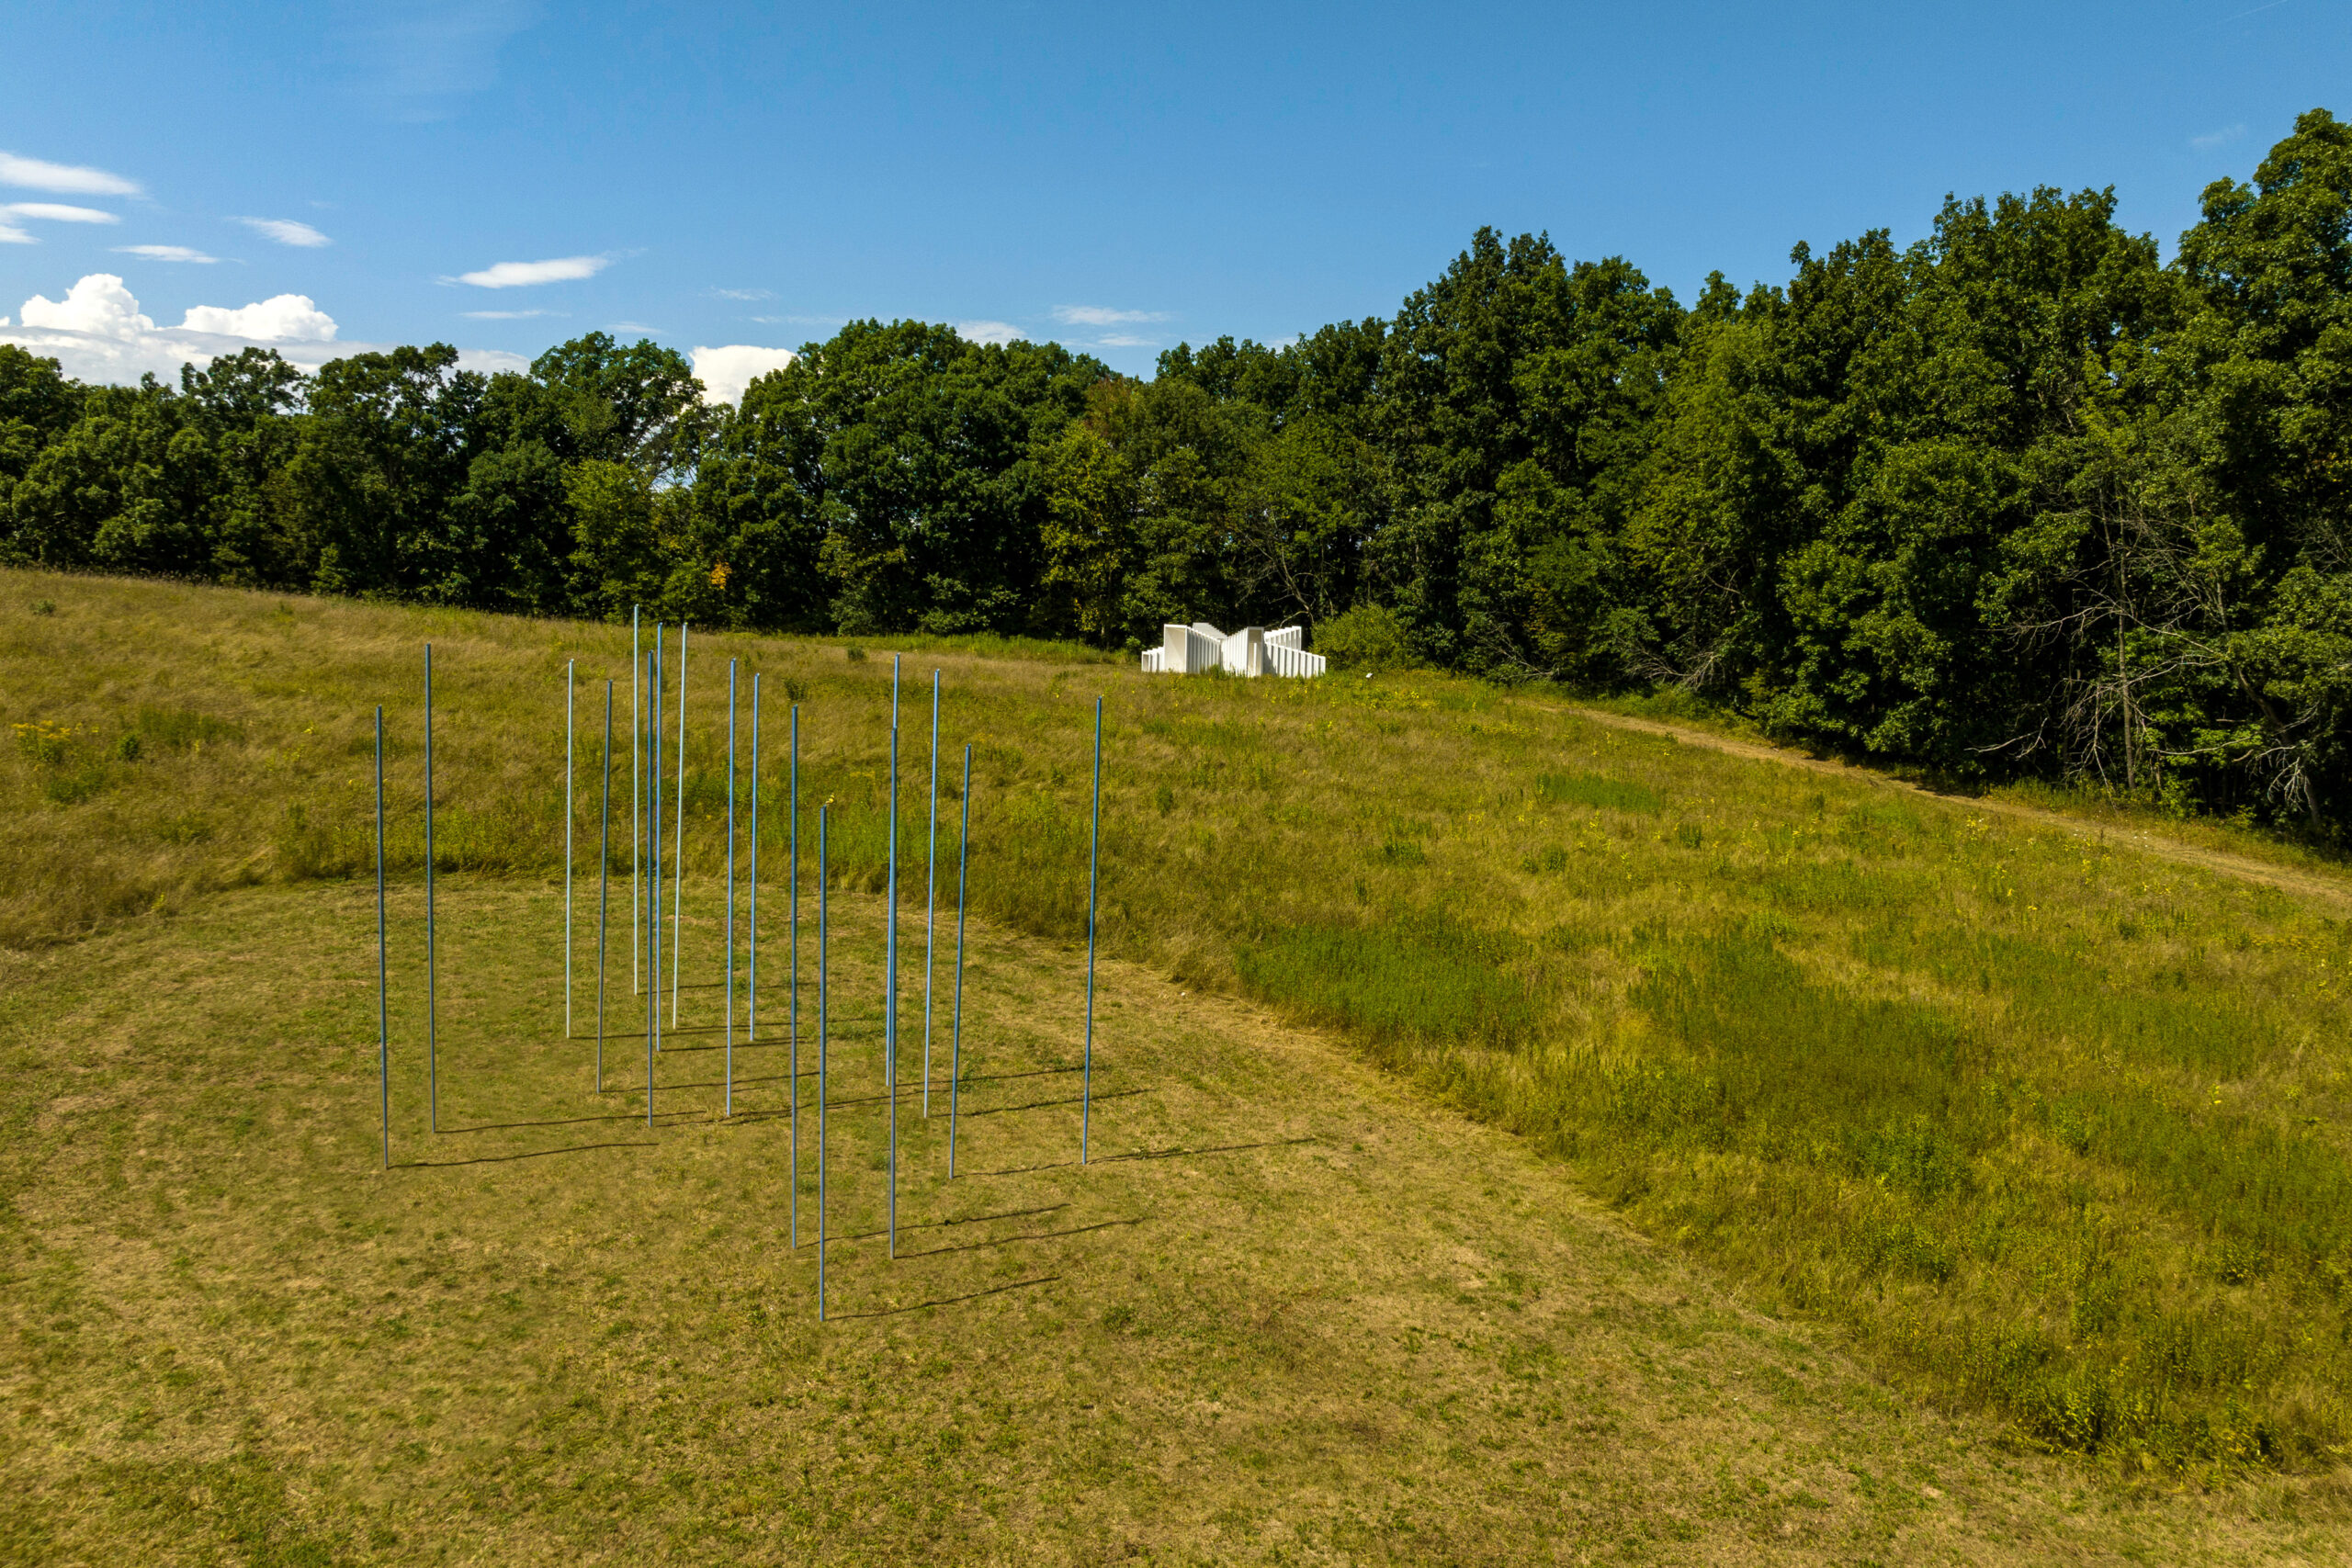 View of Art Omi grounds with installations.